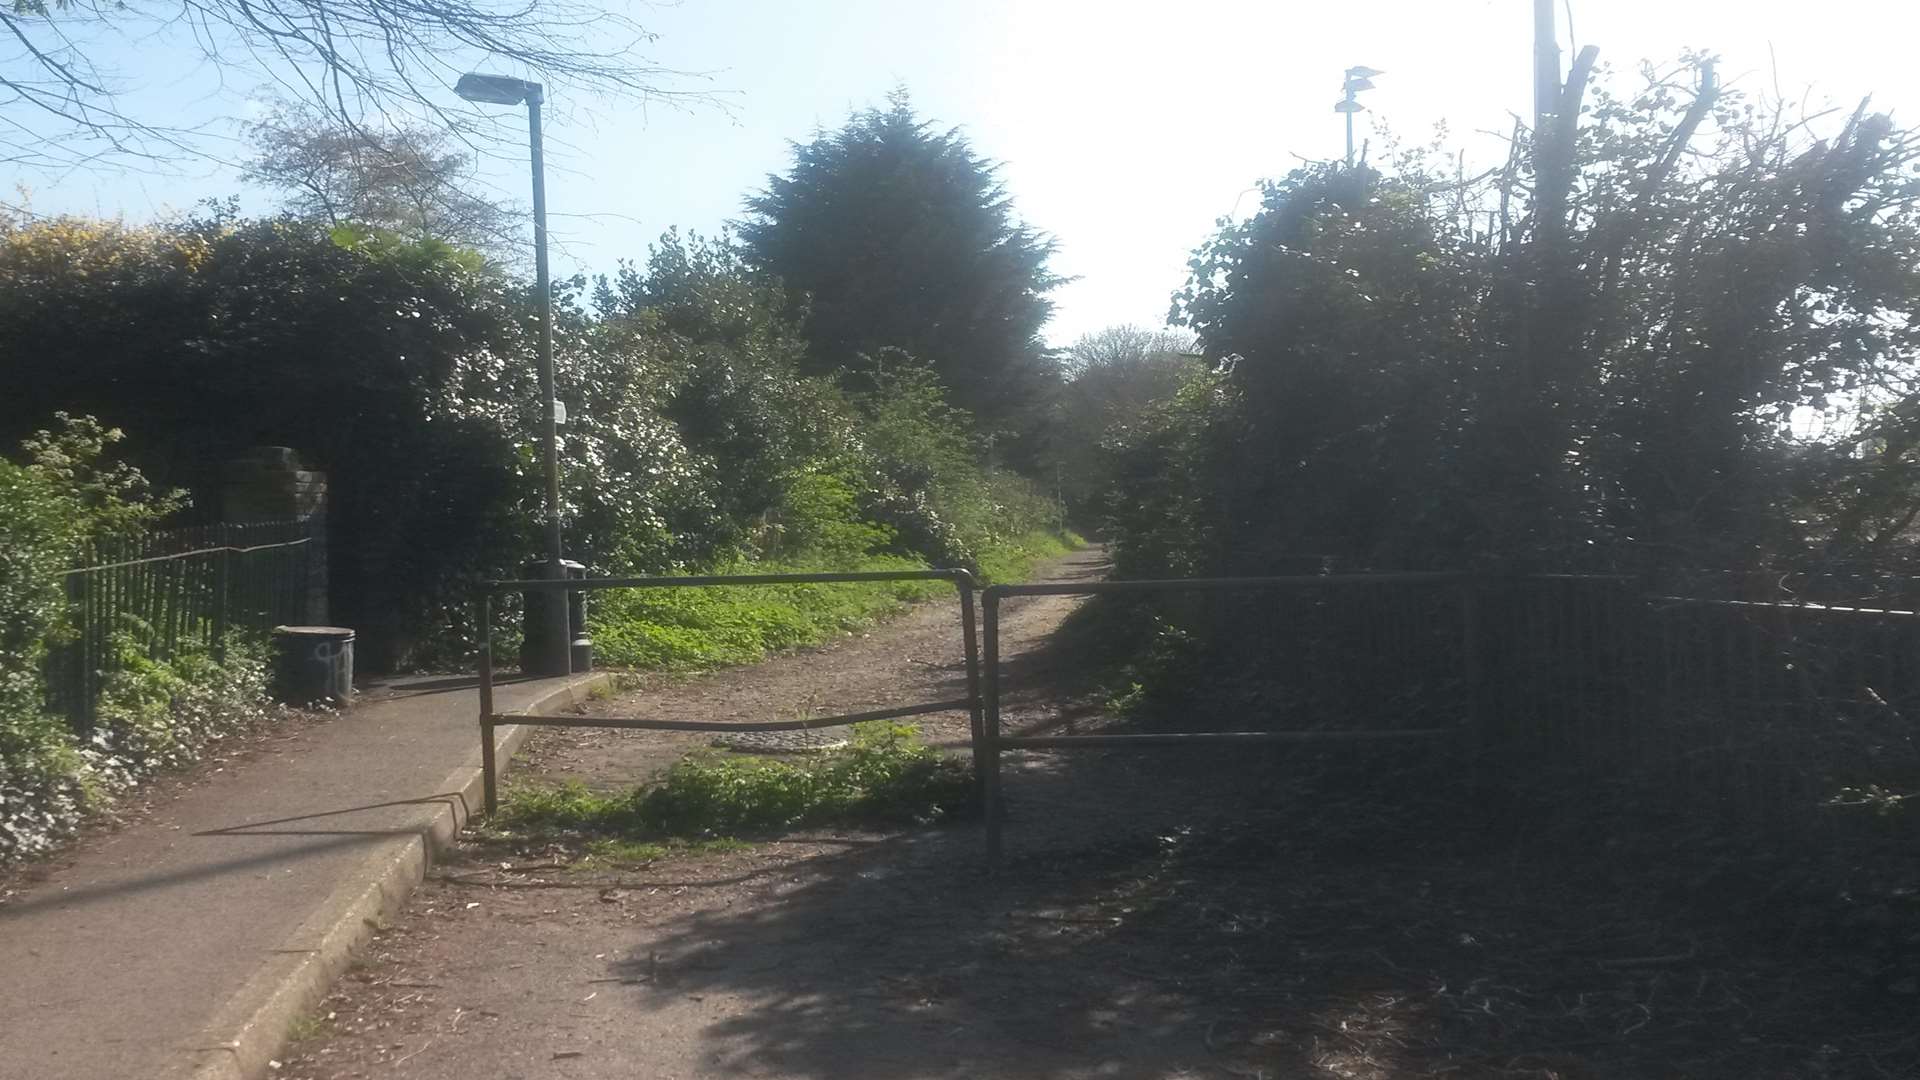 The boy was confronted by a man wielding a knife in the alley running into Church Walk, Gravesend